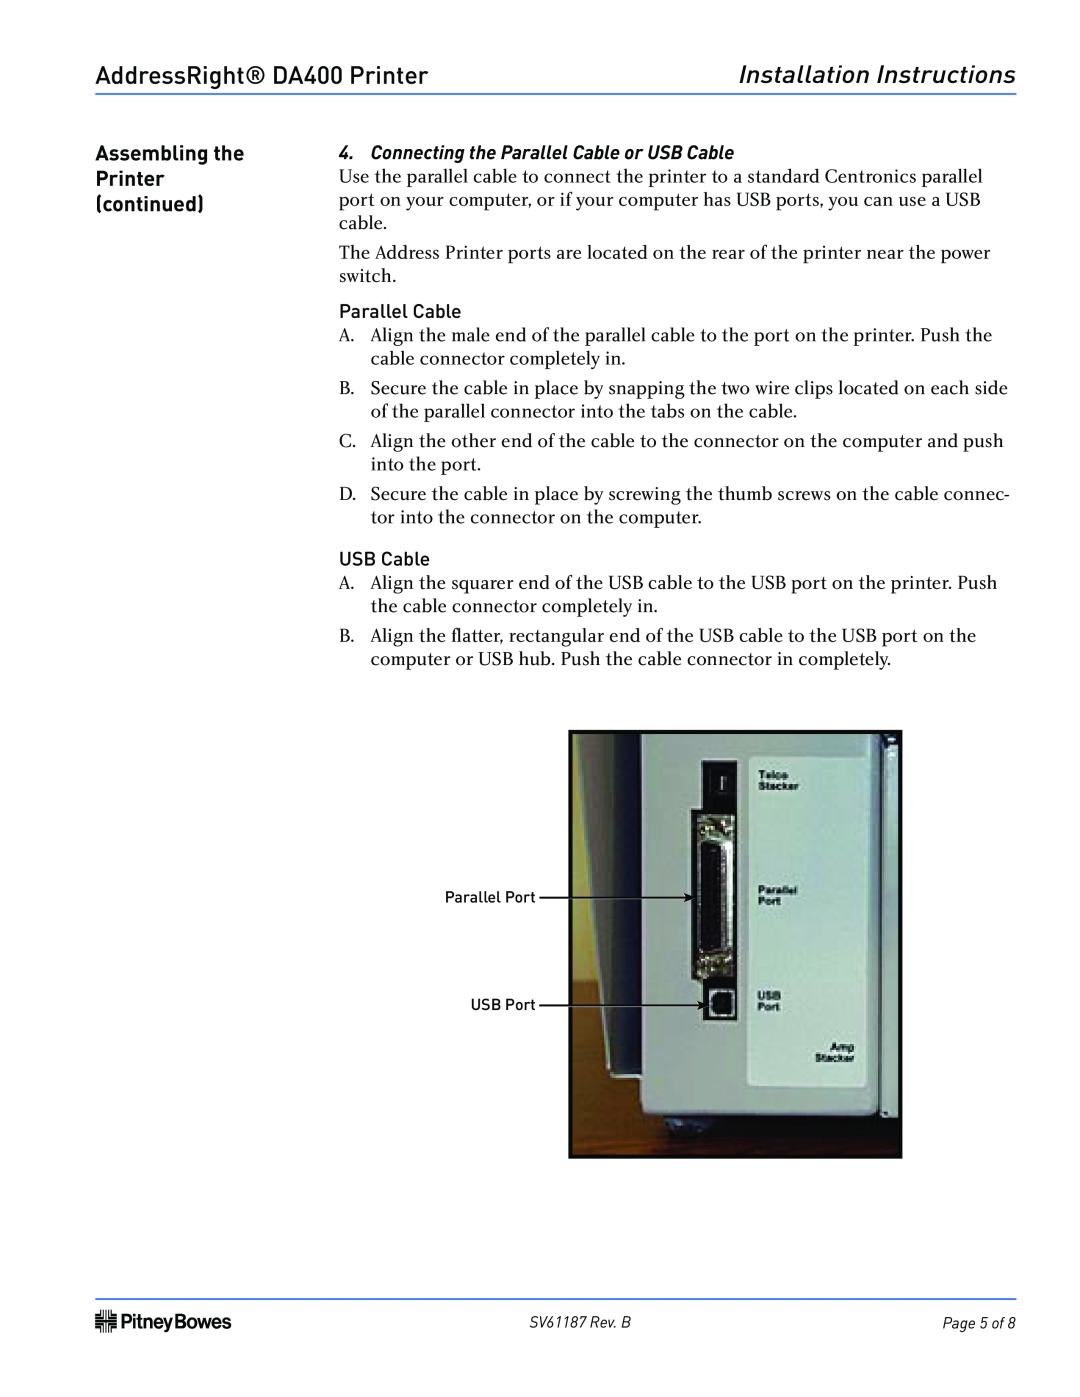 Pitney Bowes installation instructions AddressRight DA400 Printer, Installation Instructions, Assembling the, continued 